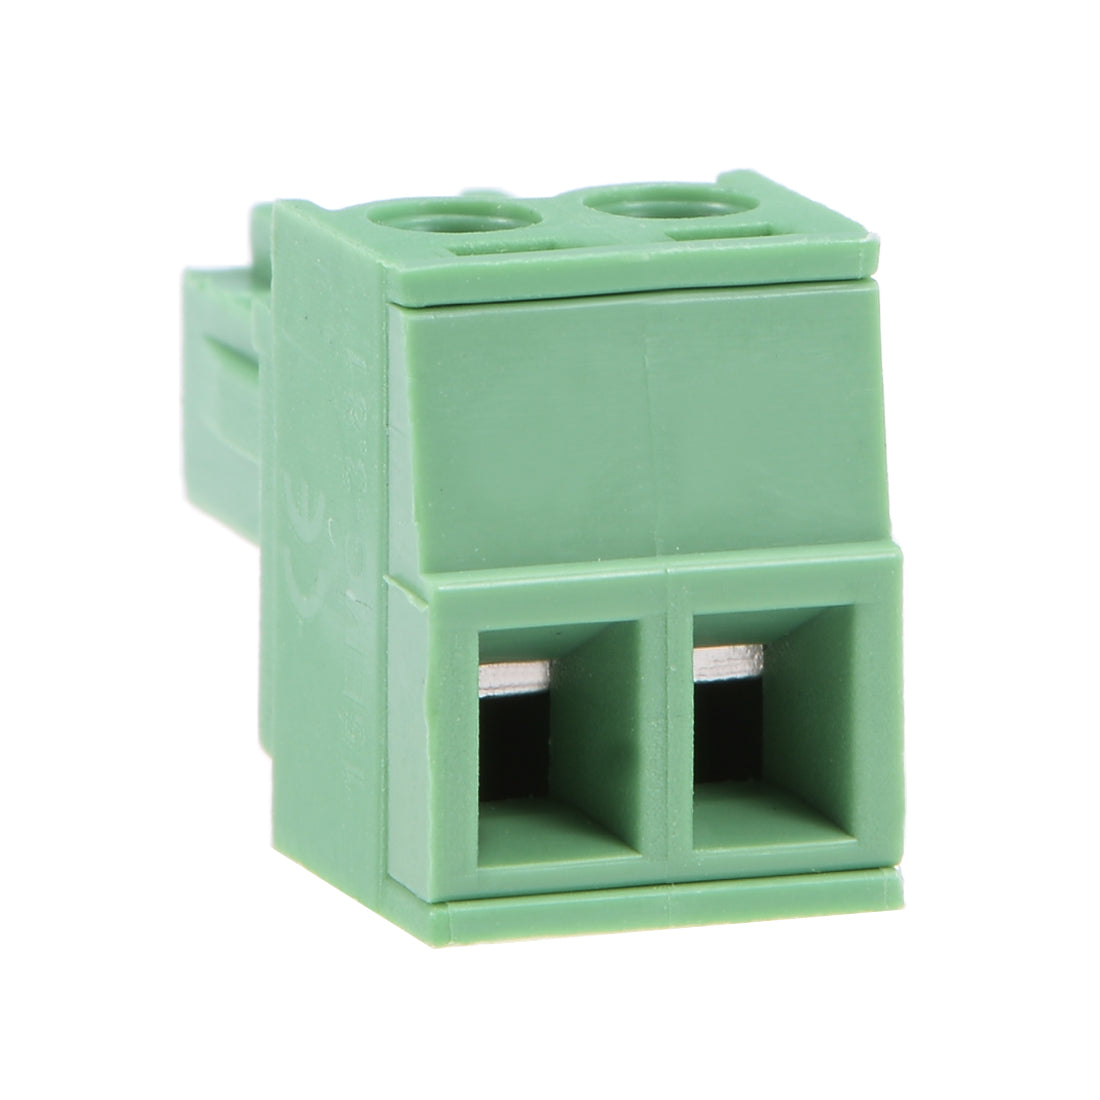 uxcell Uxcell 20Pcs AC300V 10A 3.81mm Pitch 2P Flat Angle Needle Seat Insert-In PCB Terminal Block Connector green